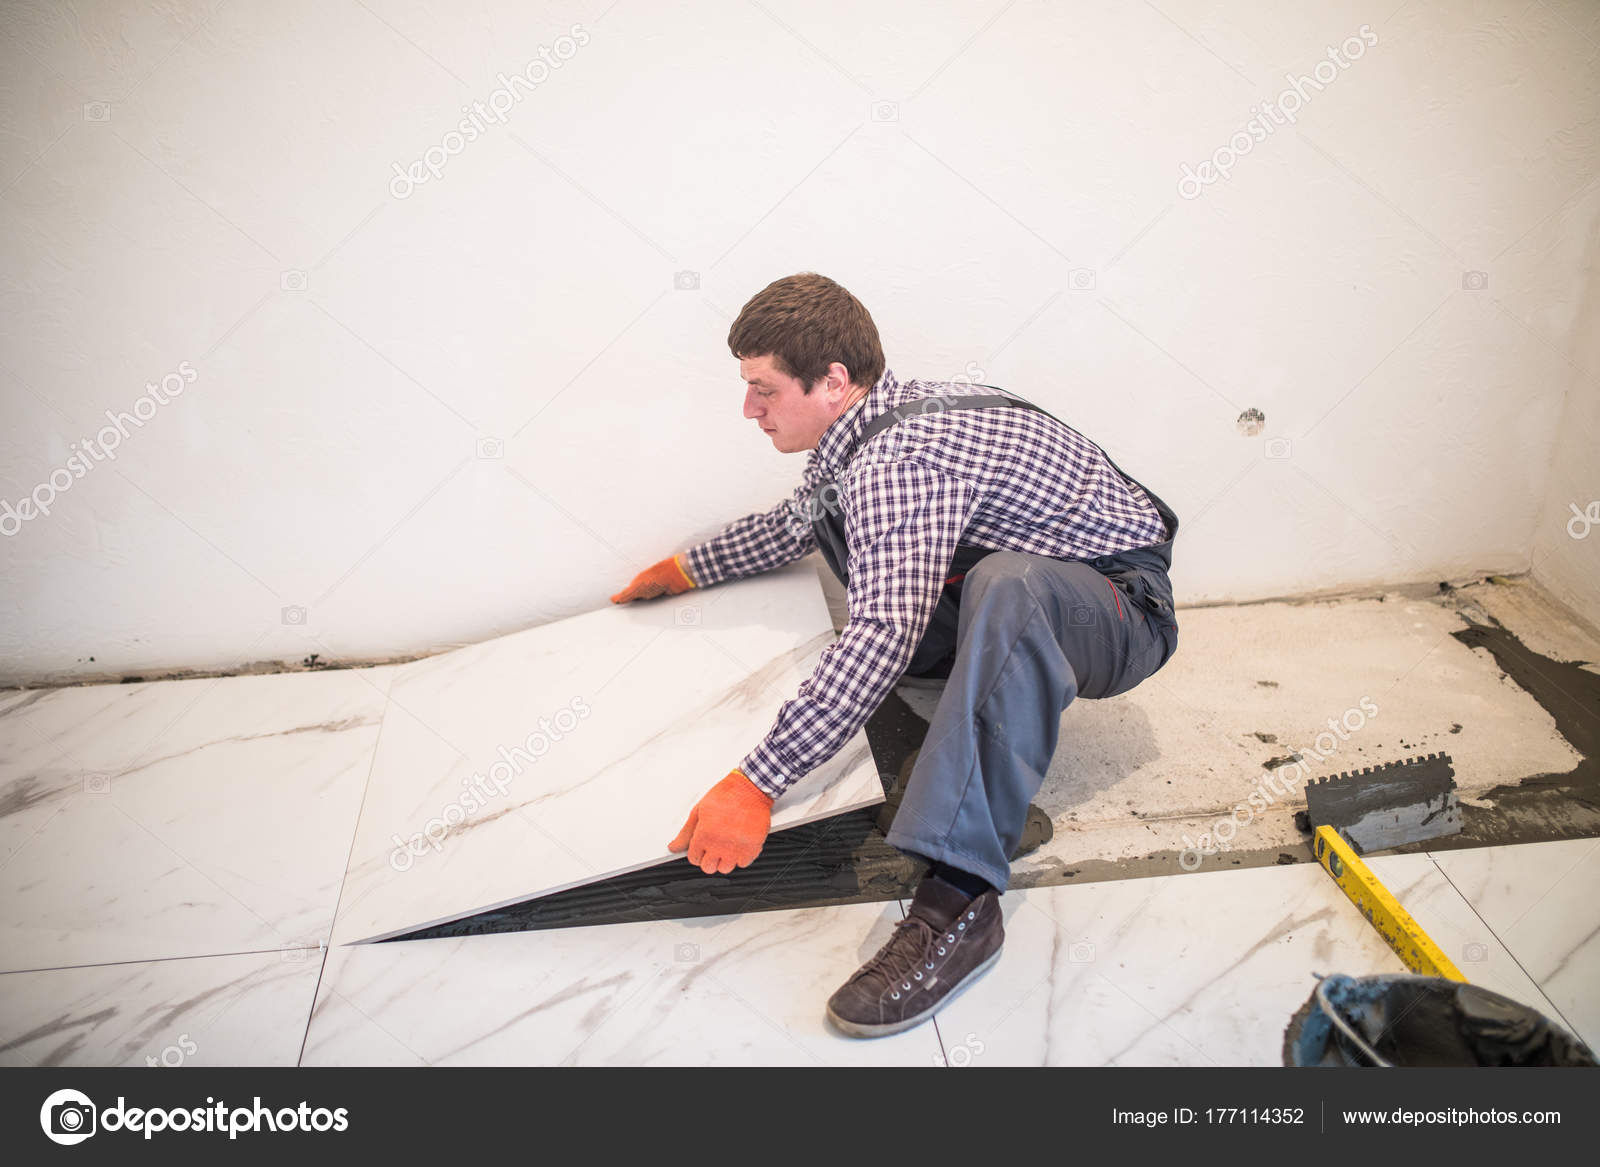 Laying Ceramic Tiles Worker Placing, How To Lay Ceramic Floor Tile